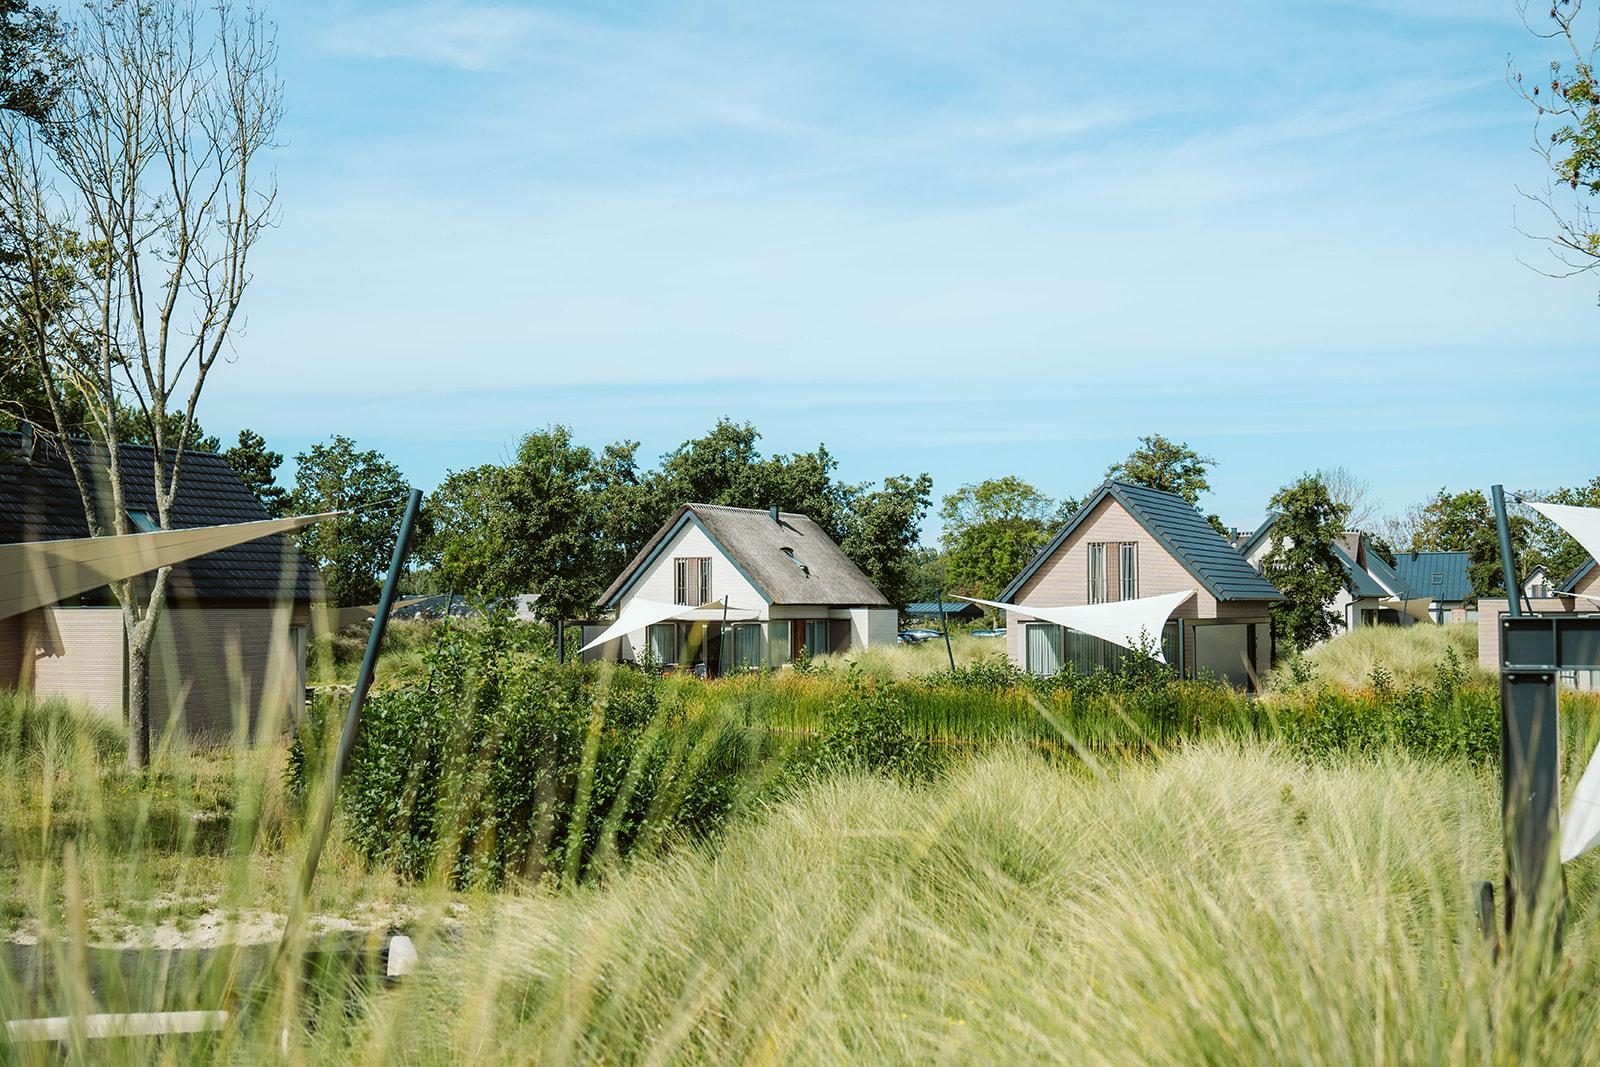 Ridderstee Ouddorp Duin: dream spot by the sea!